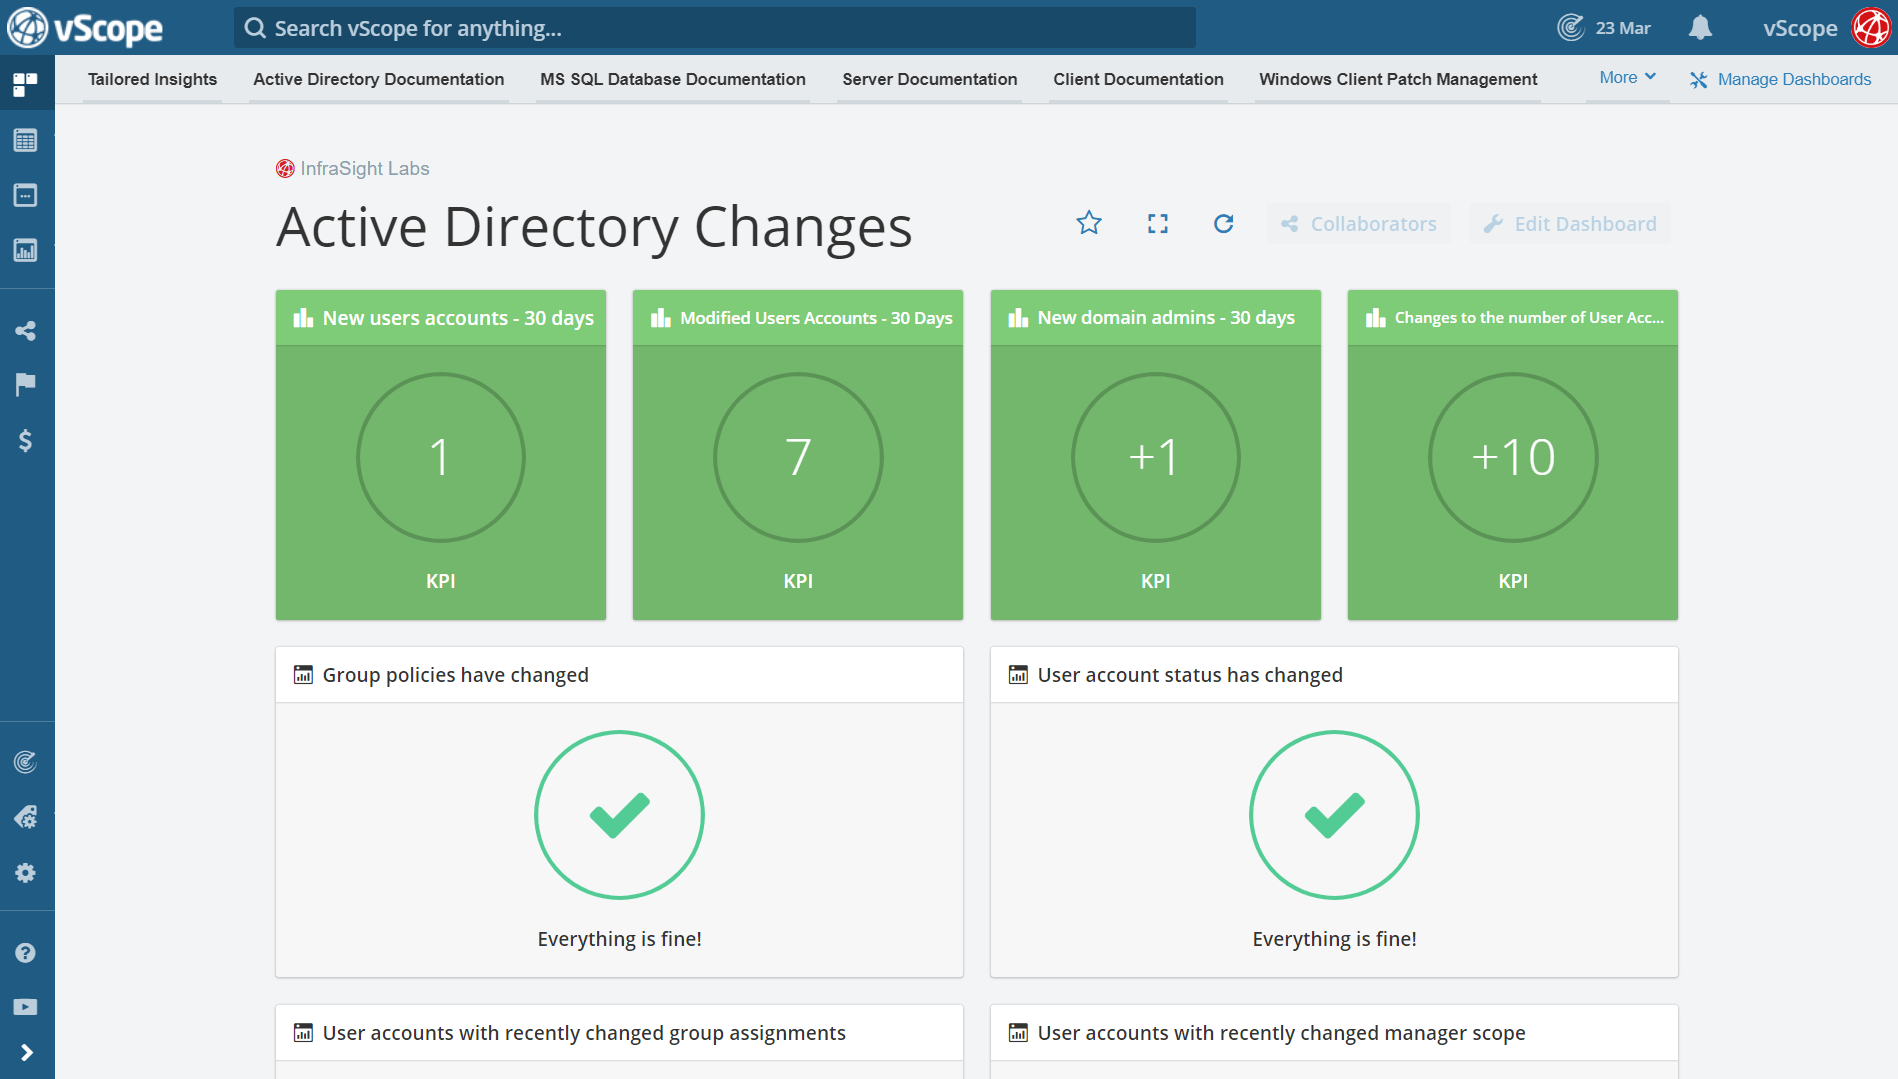 Active Directory Changes Dashboard